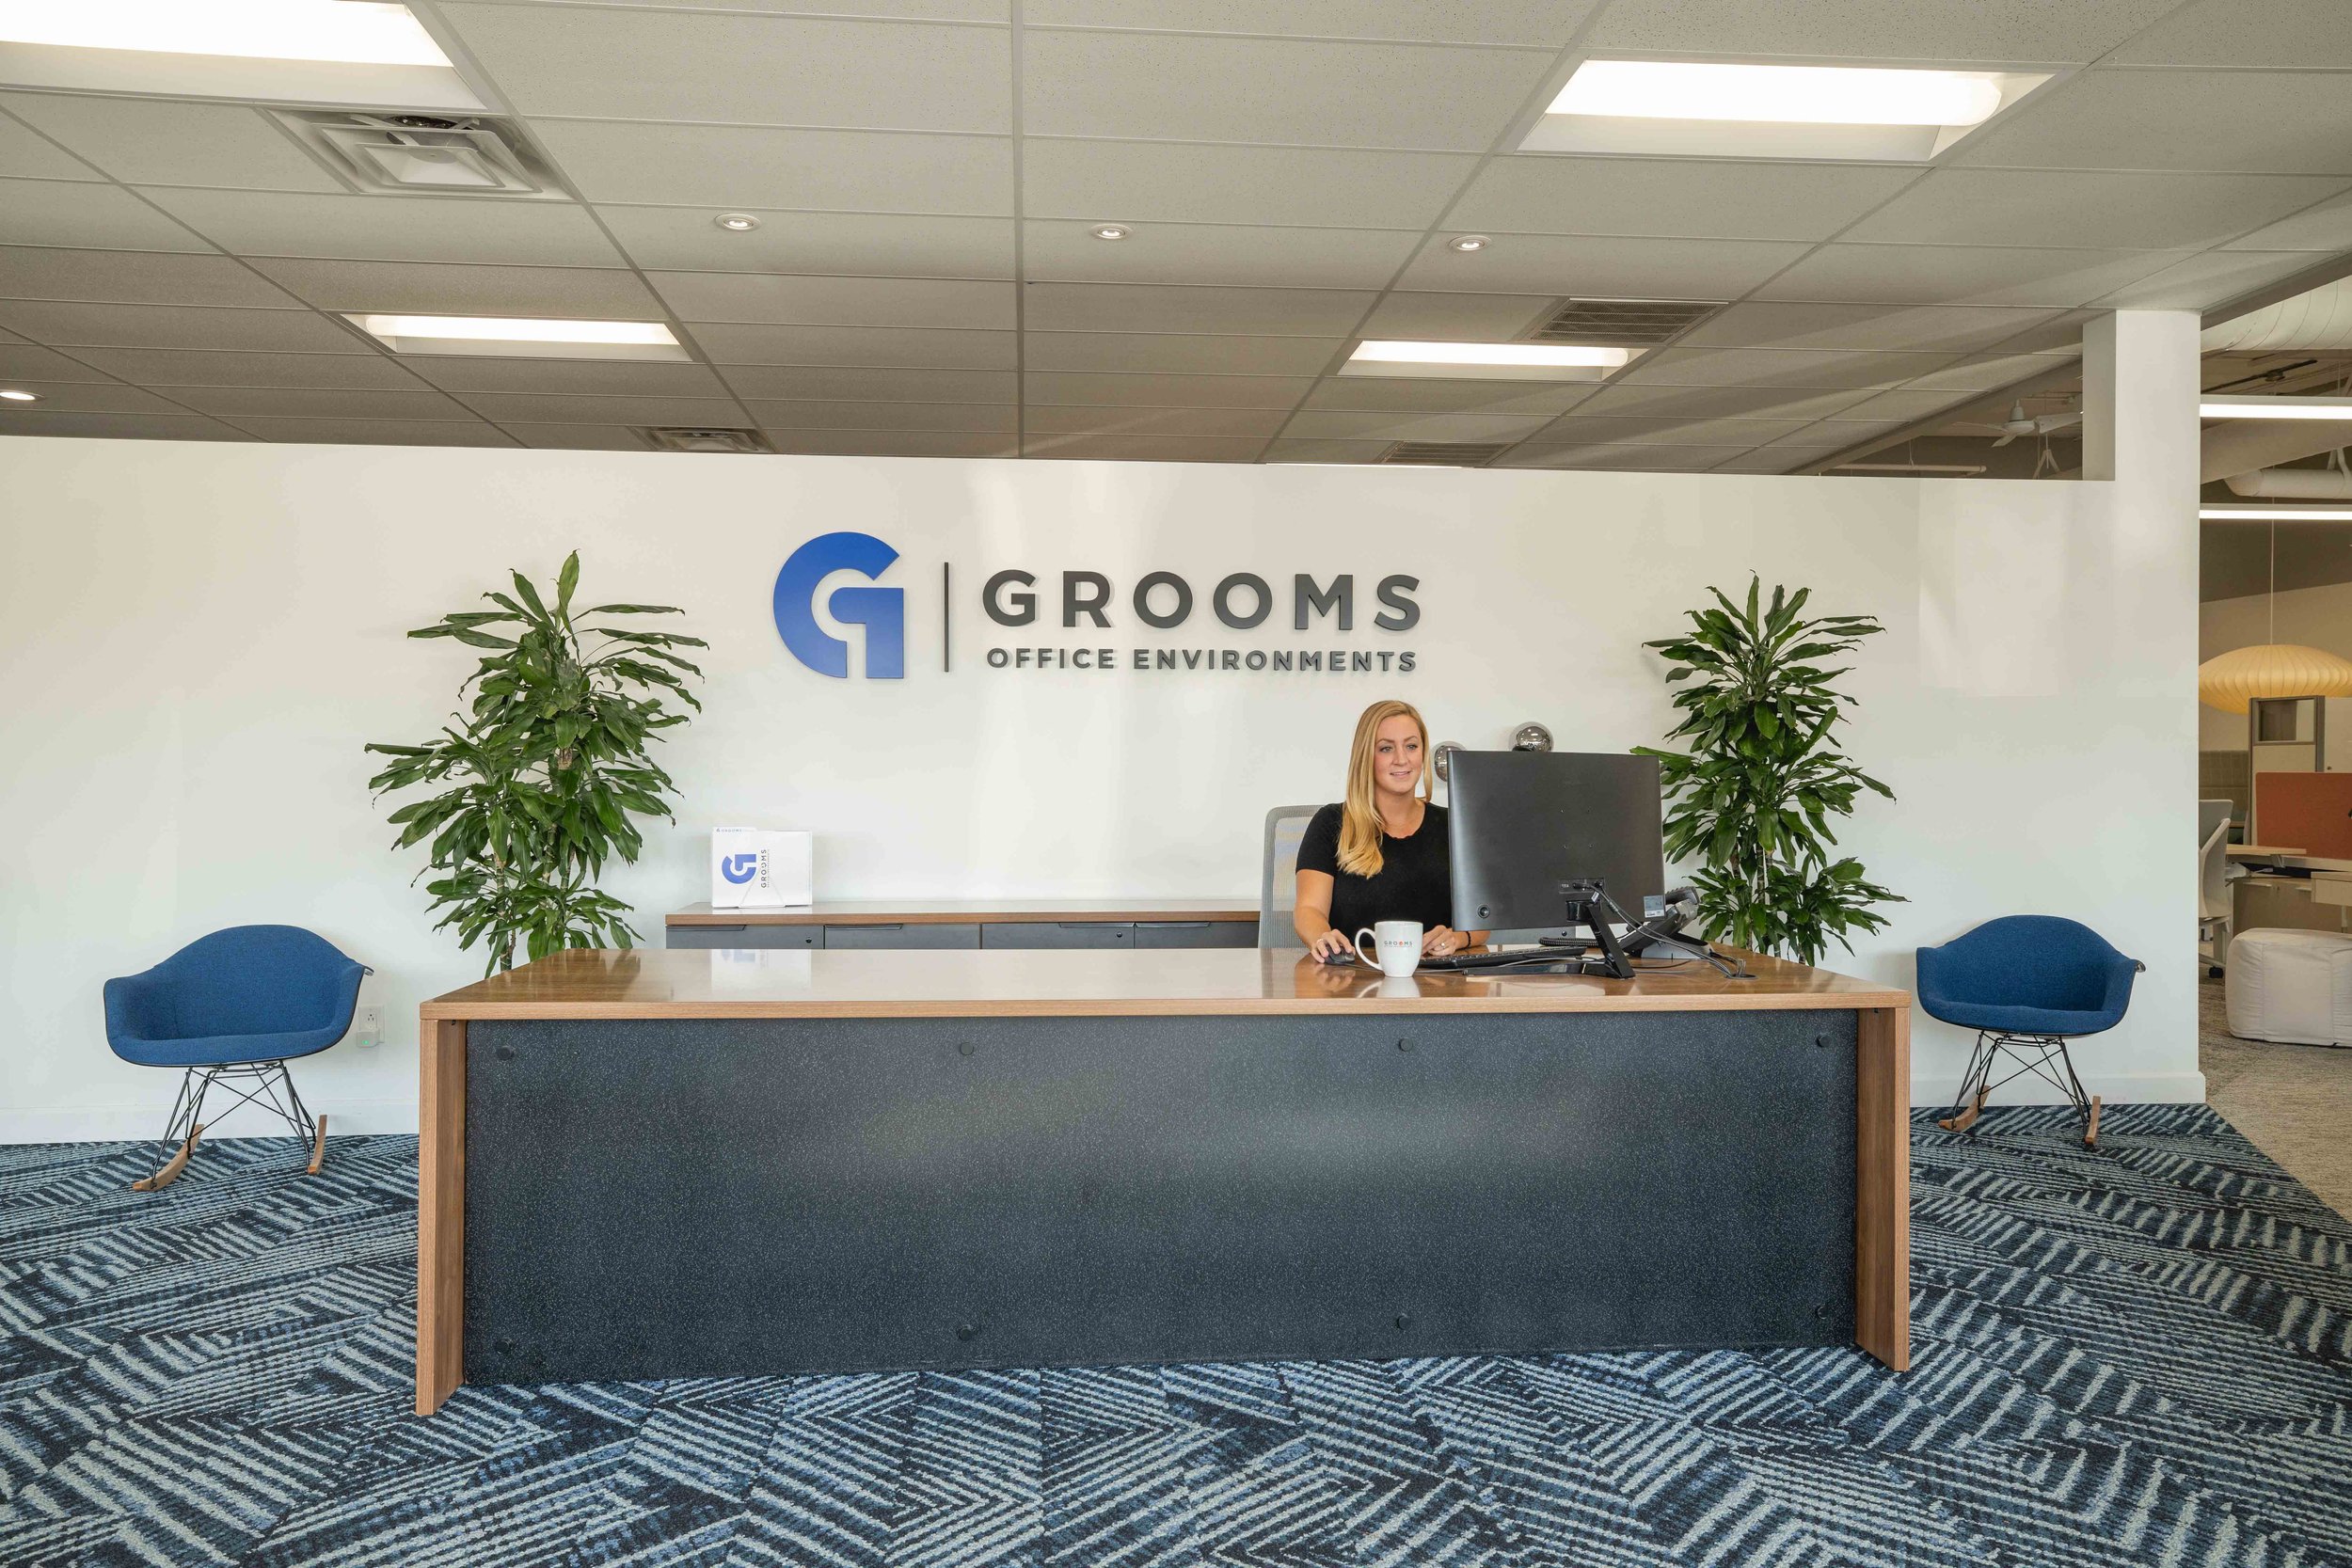  Grooms Office Environments Lobby 